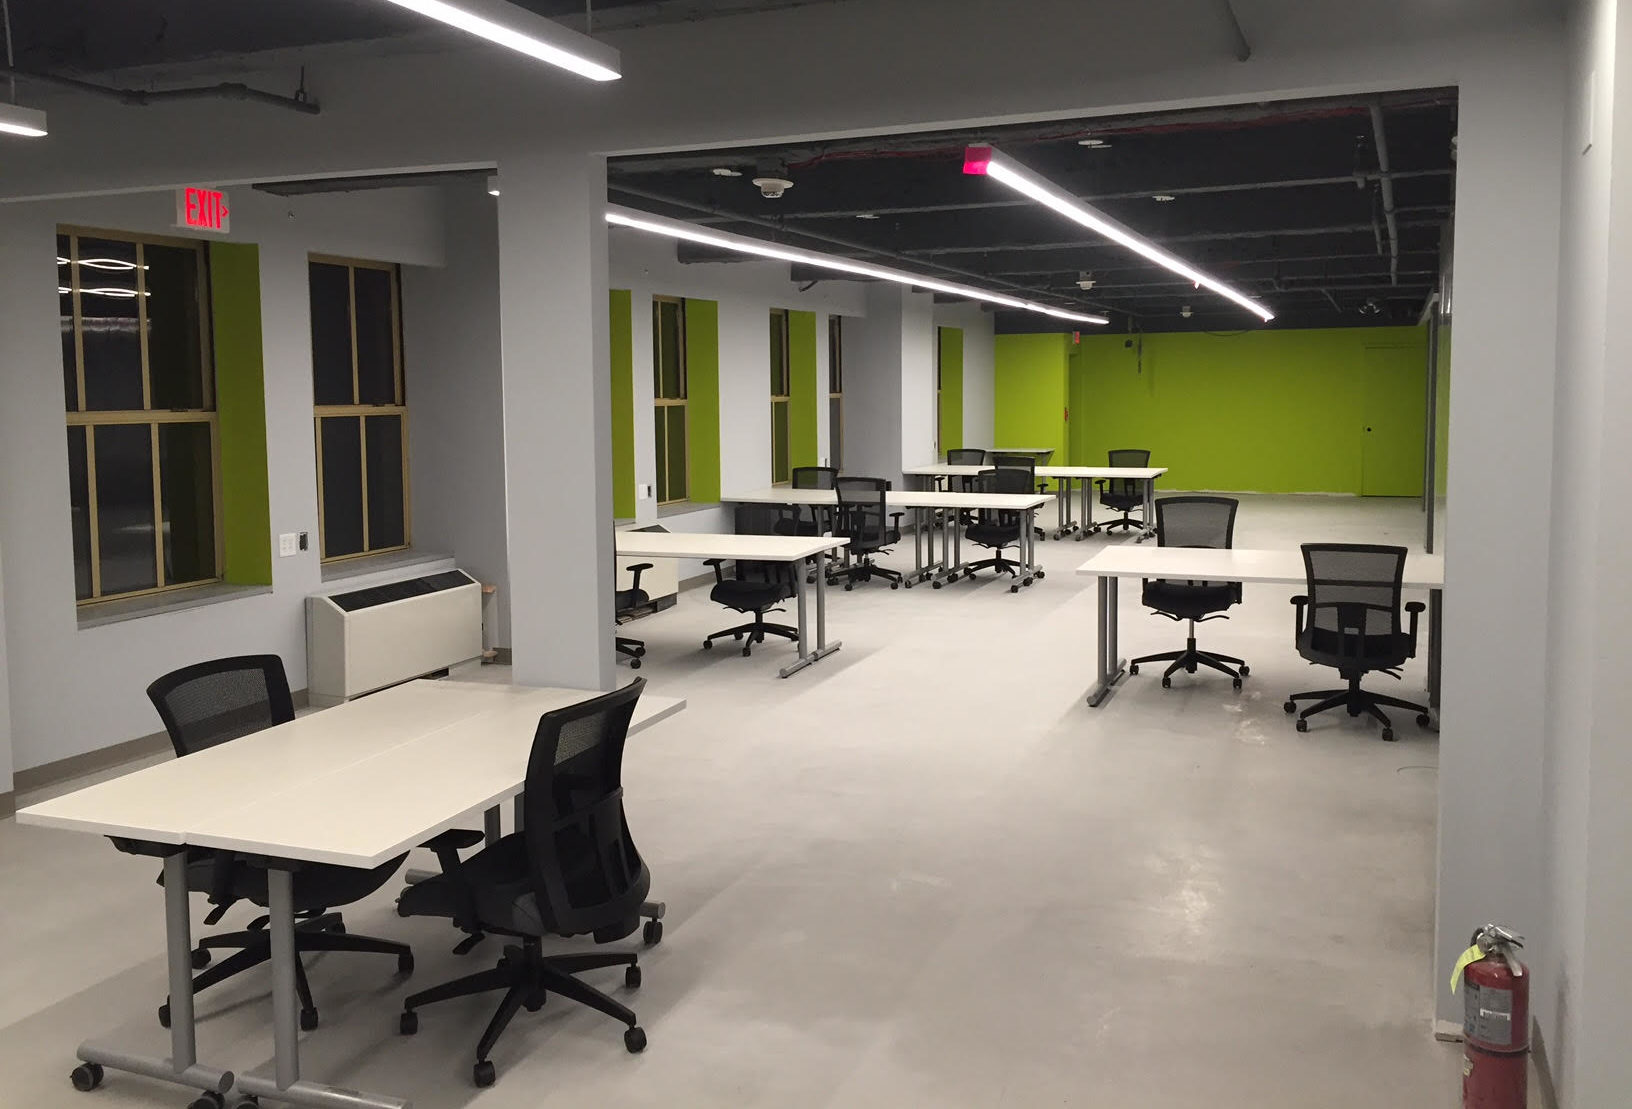 The new space had a soft open on Monday.